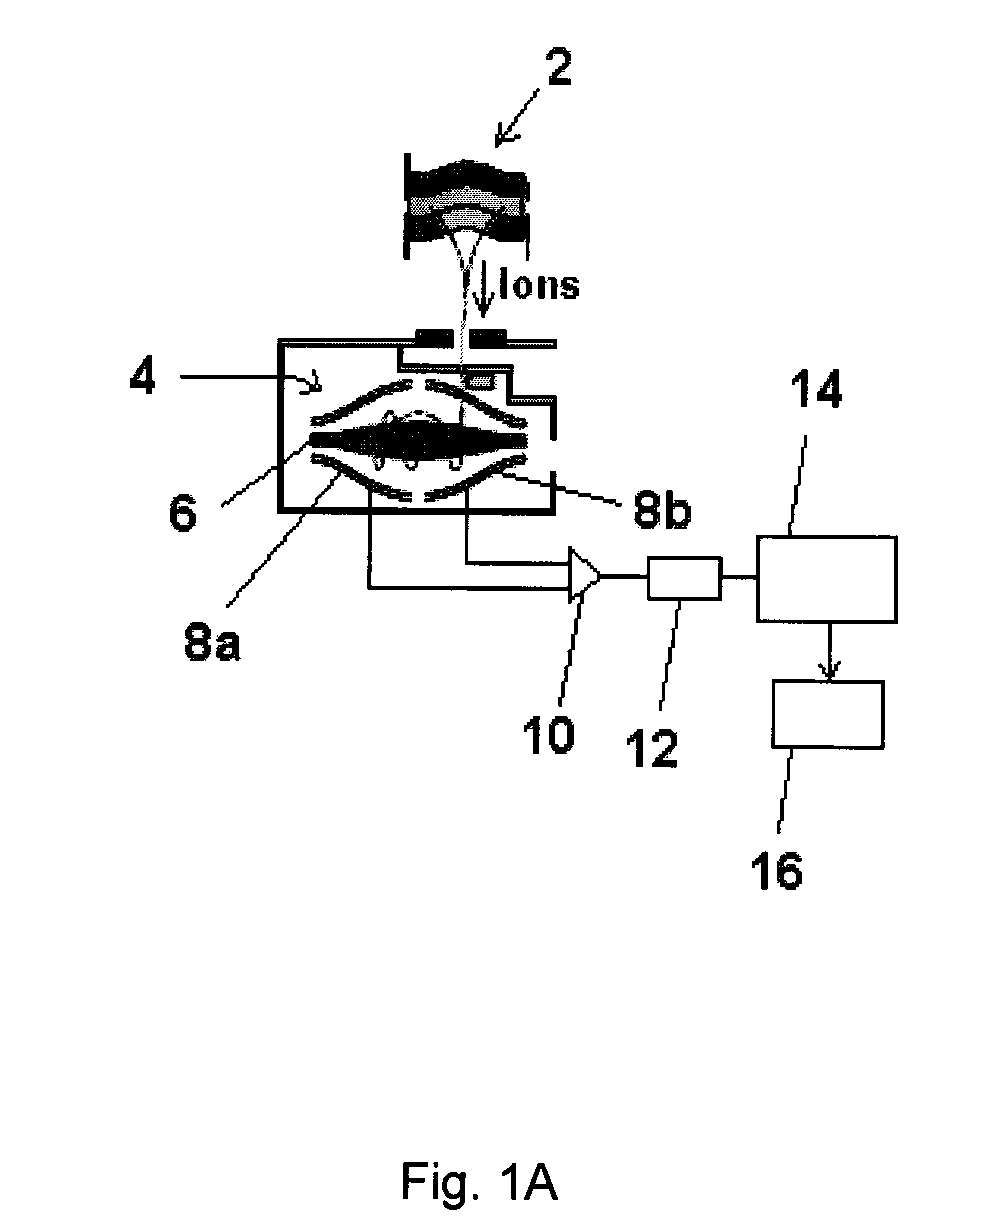 Methods and Apparatus for Producing a Mass Spectrum